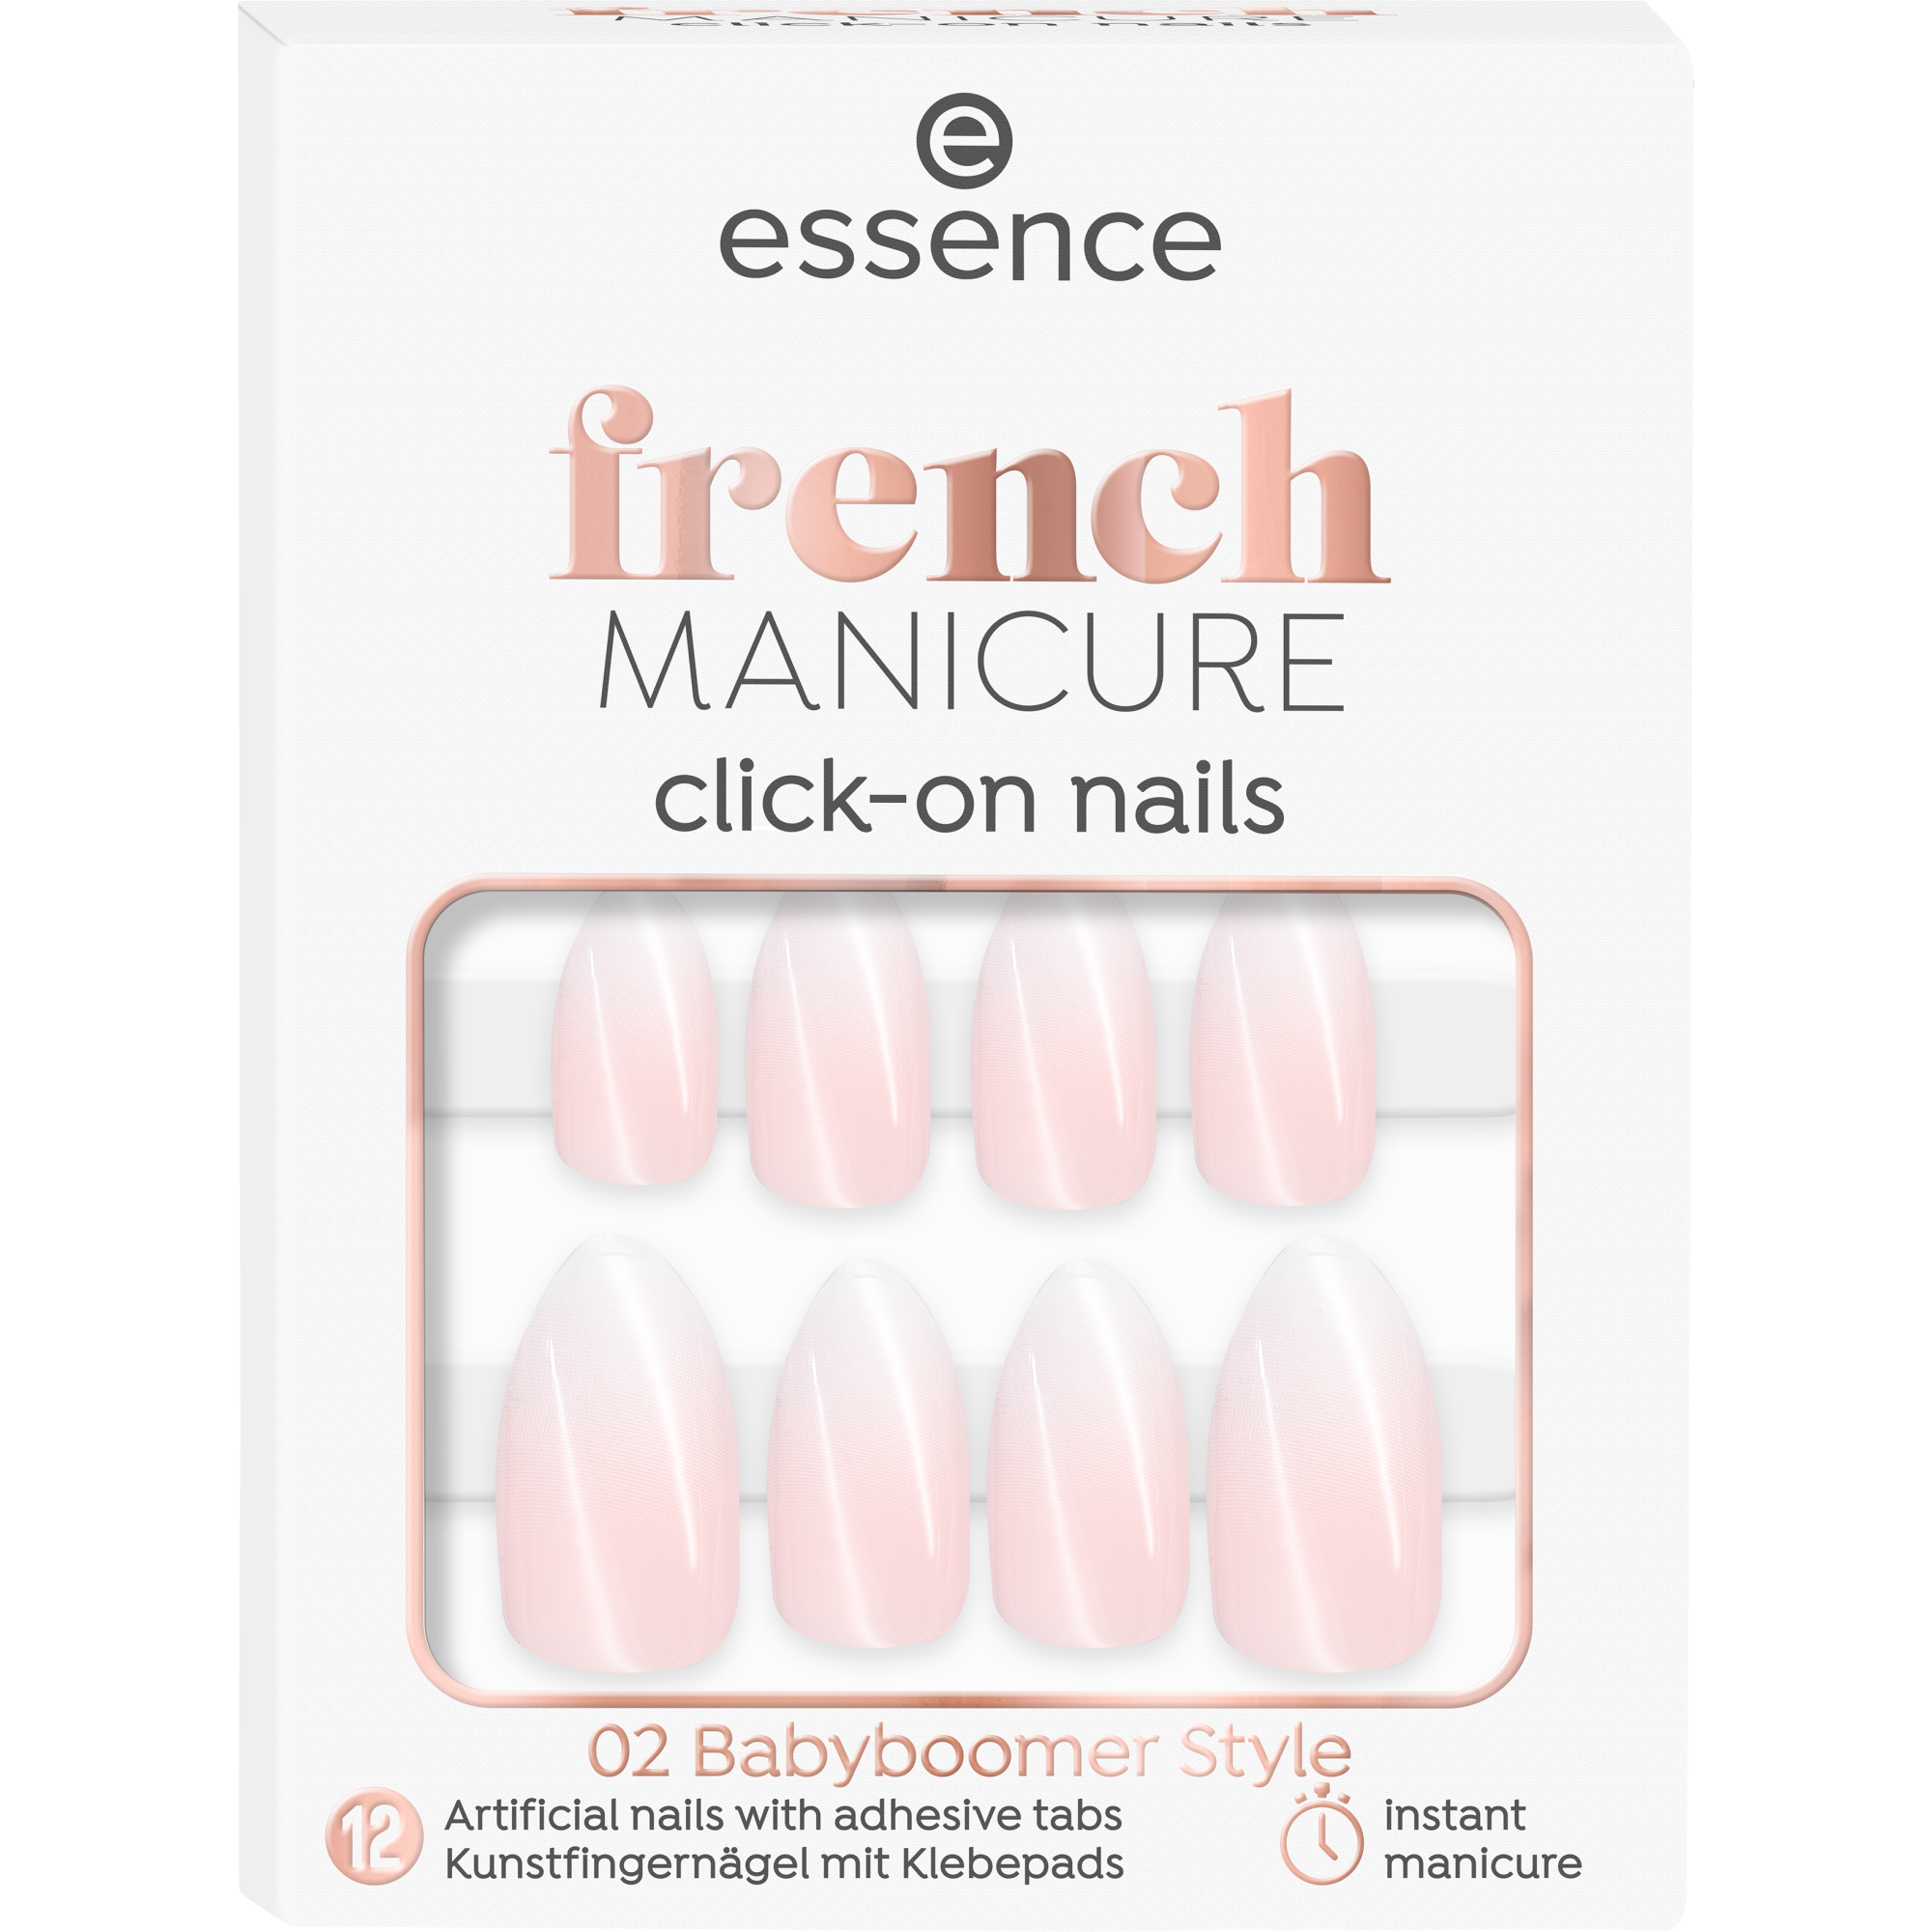 Uñas artificiales click-on french MANICURE